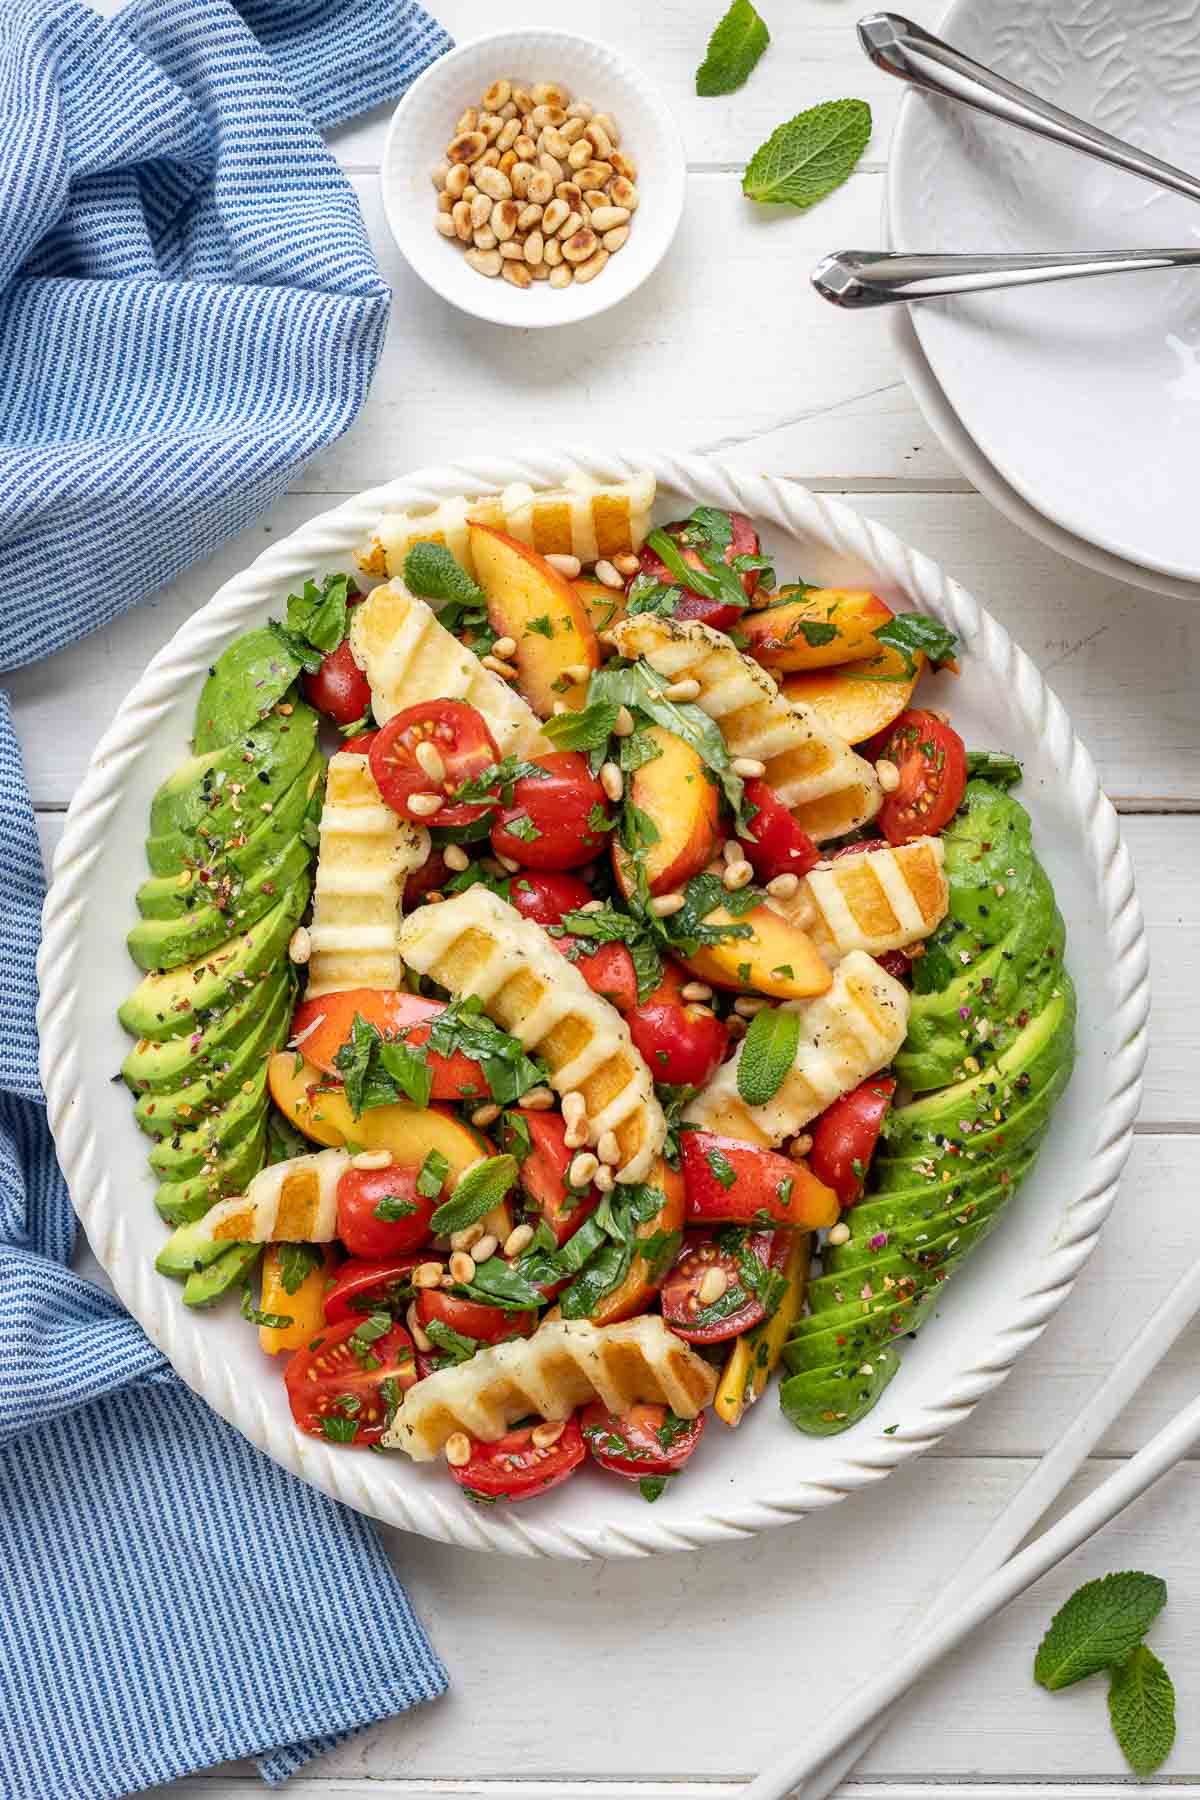 Grill salad with halloumi, nectarine and tomatoes